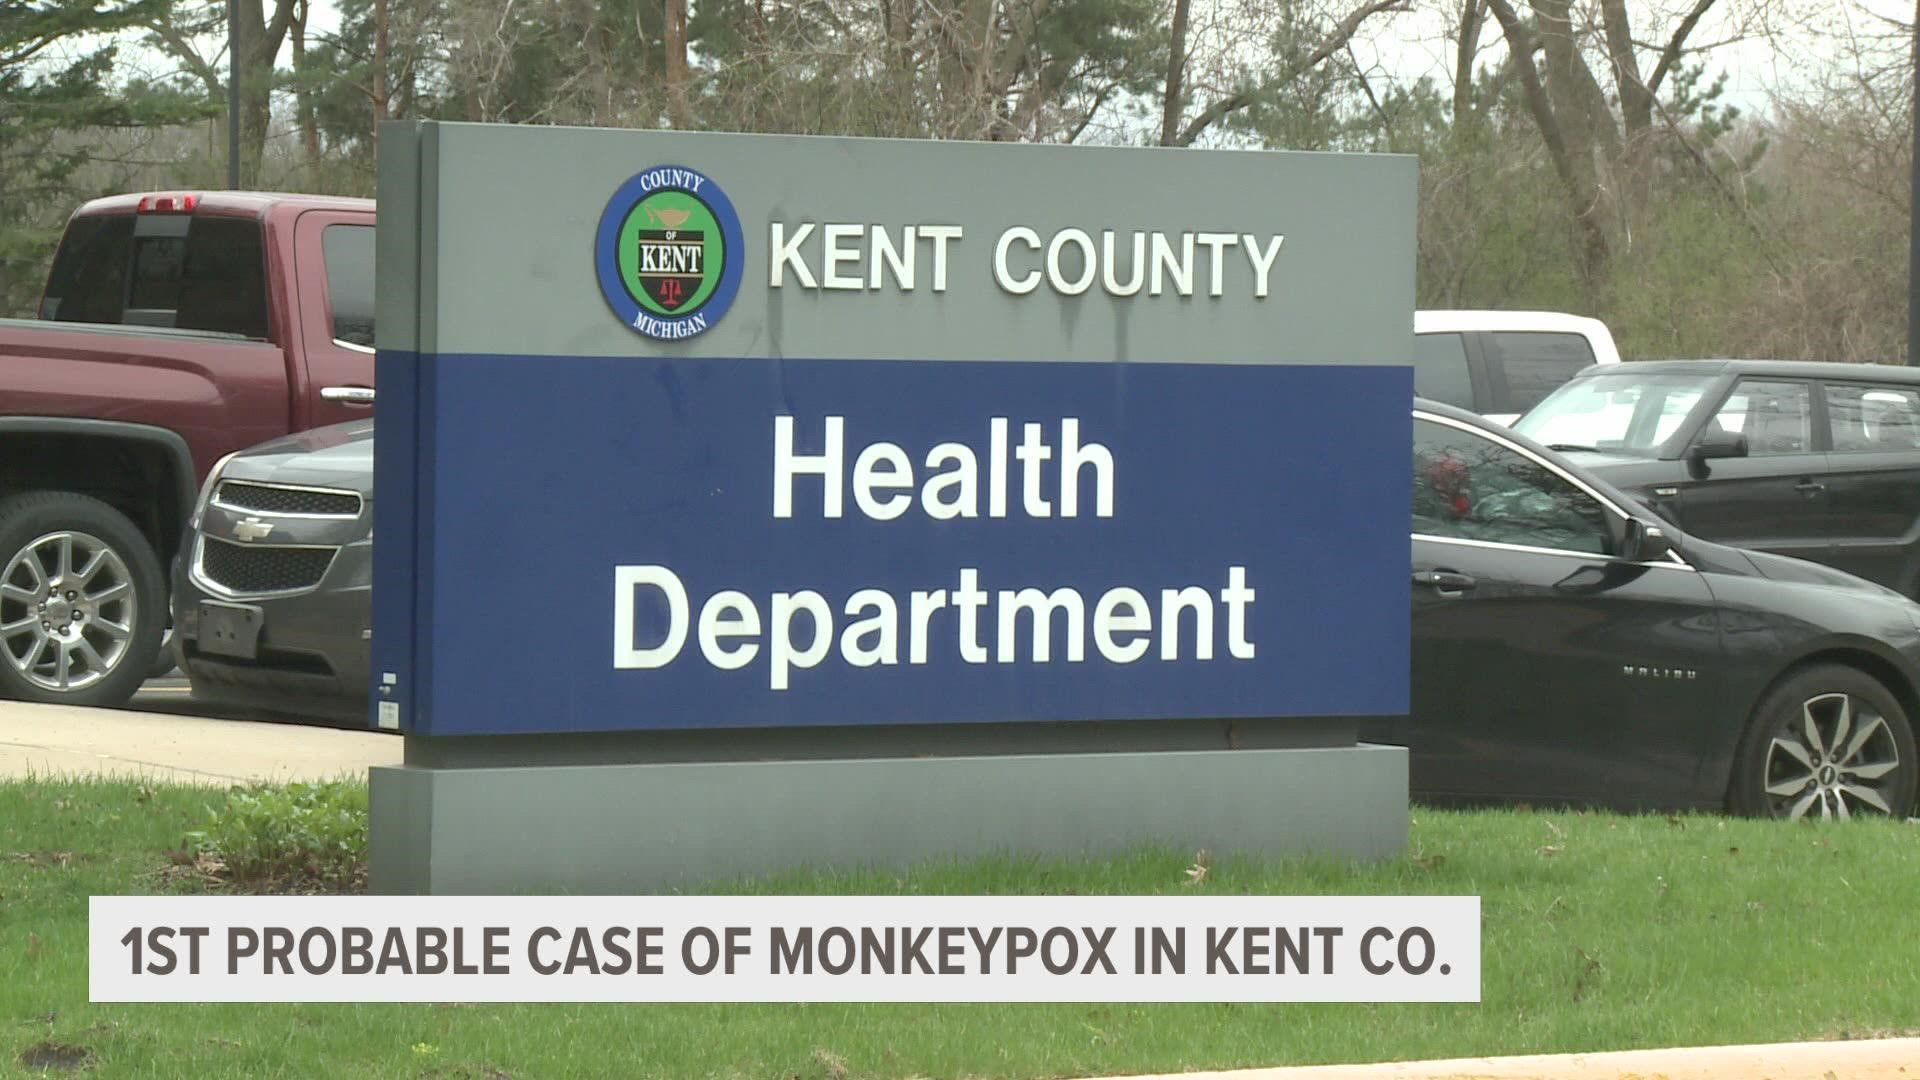 The first probable cause of monkeypox is here, according to Kent County Health Department officials.